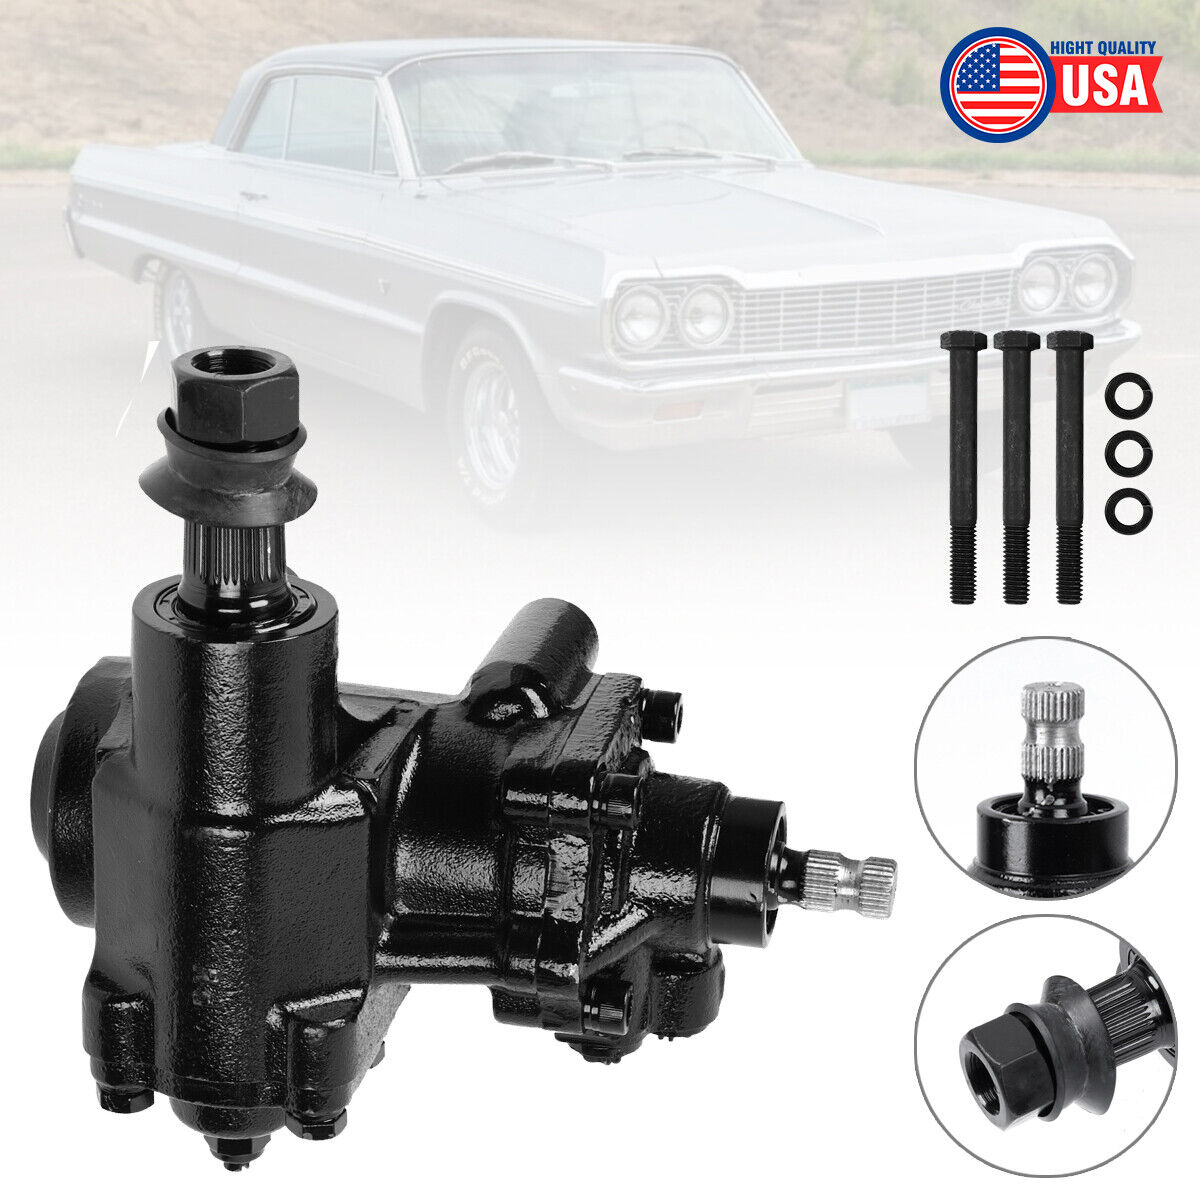 Power Steering Gear Box For 1958-1964 Chevy Impala Bel Air 500 Series SGB5864*US